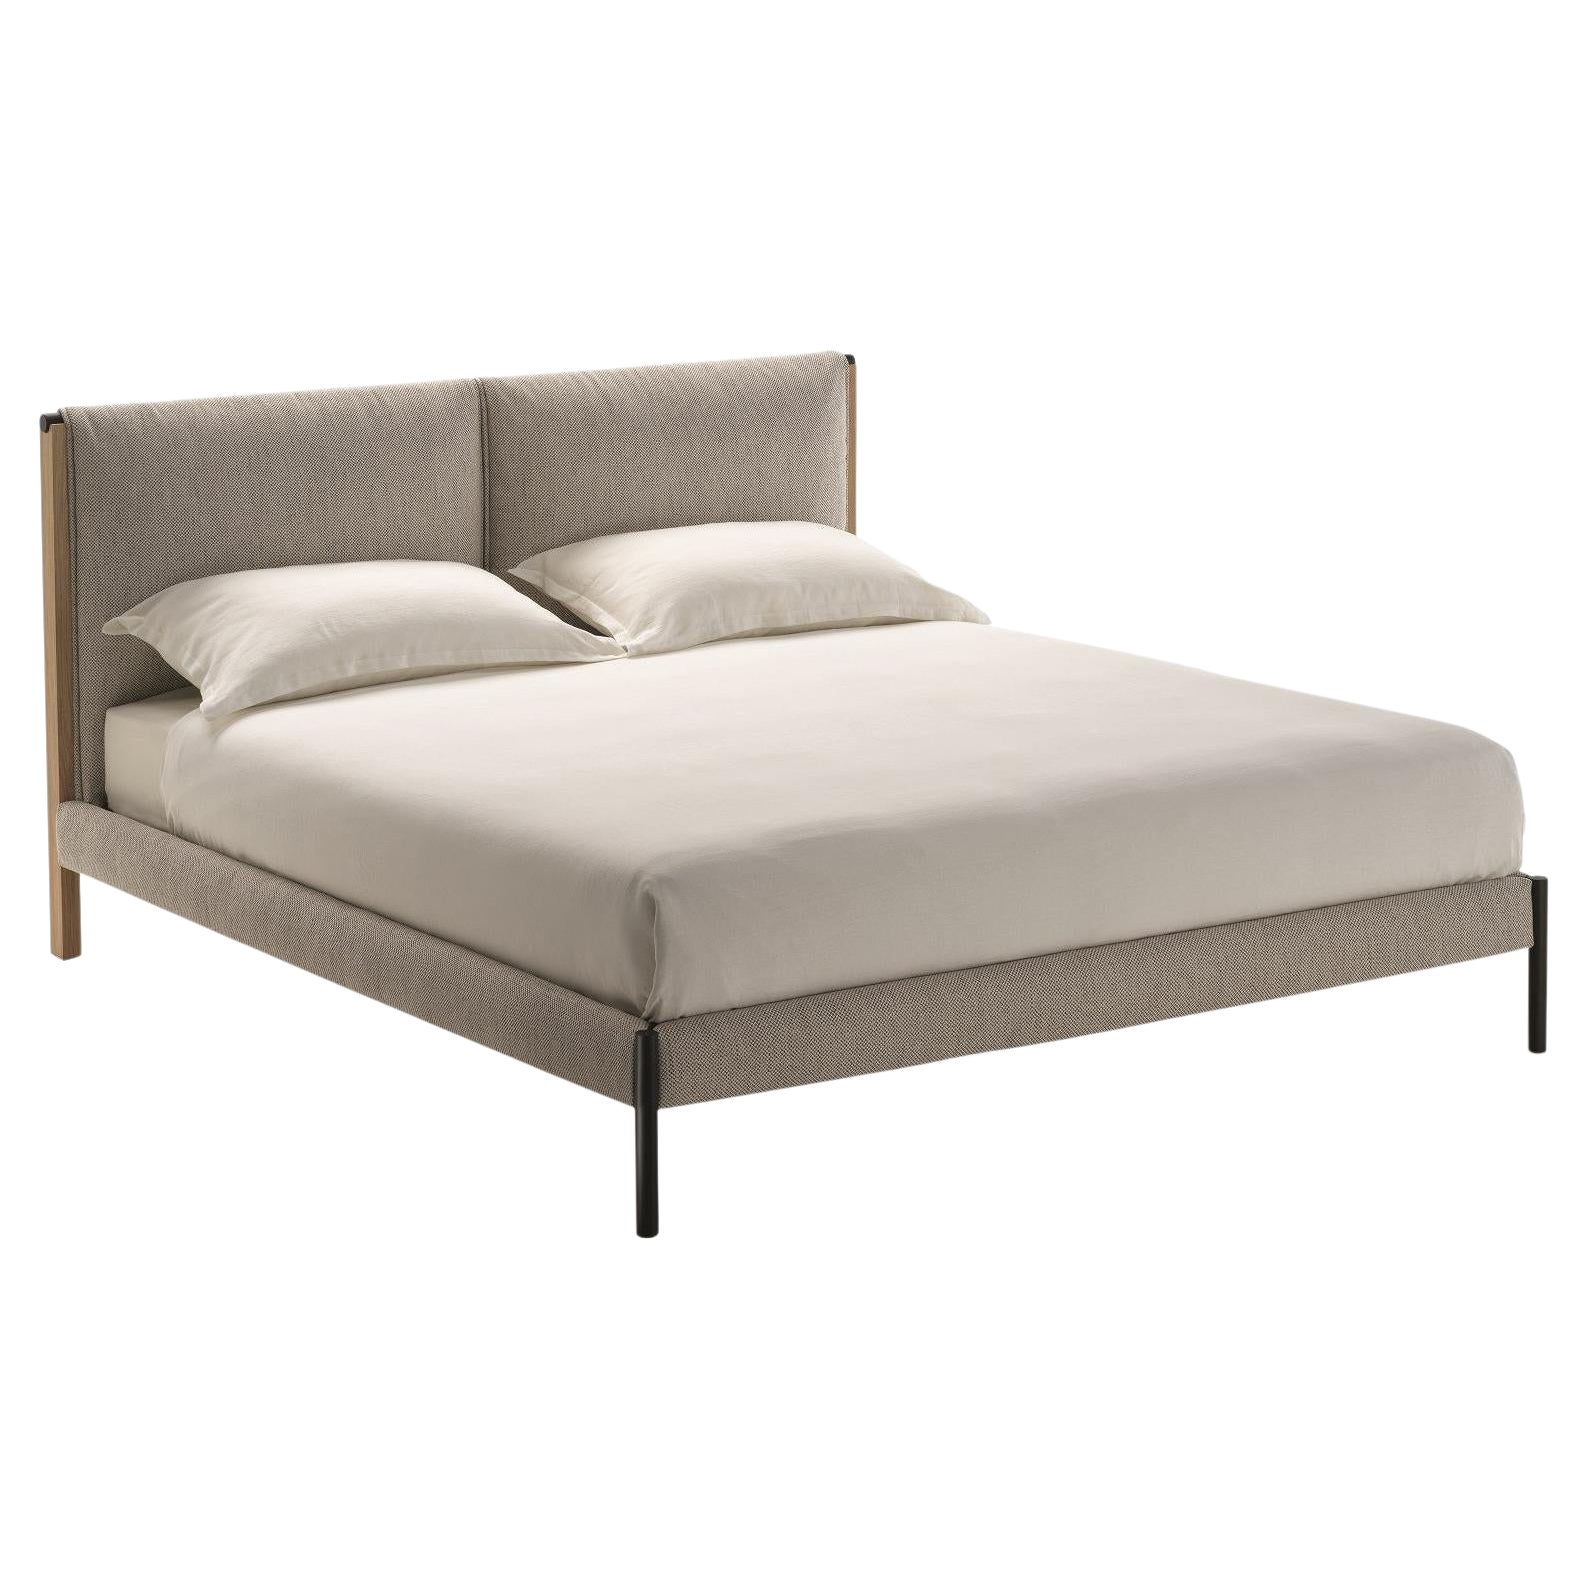 Zanotta Medium Ricordi Bed with Separate Springing in Toce Upholstery For Sale